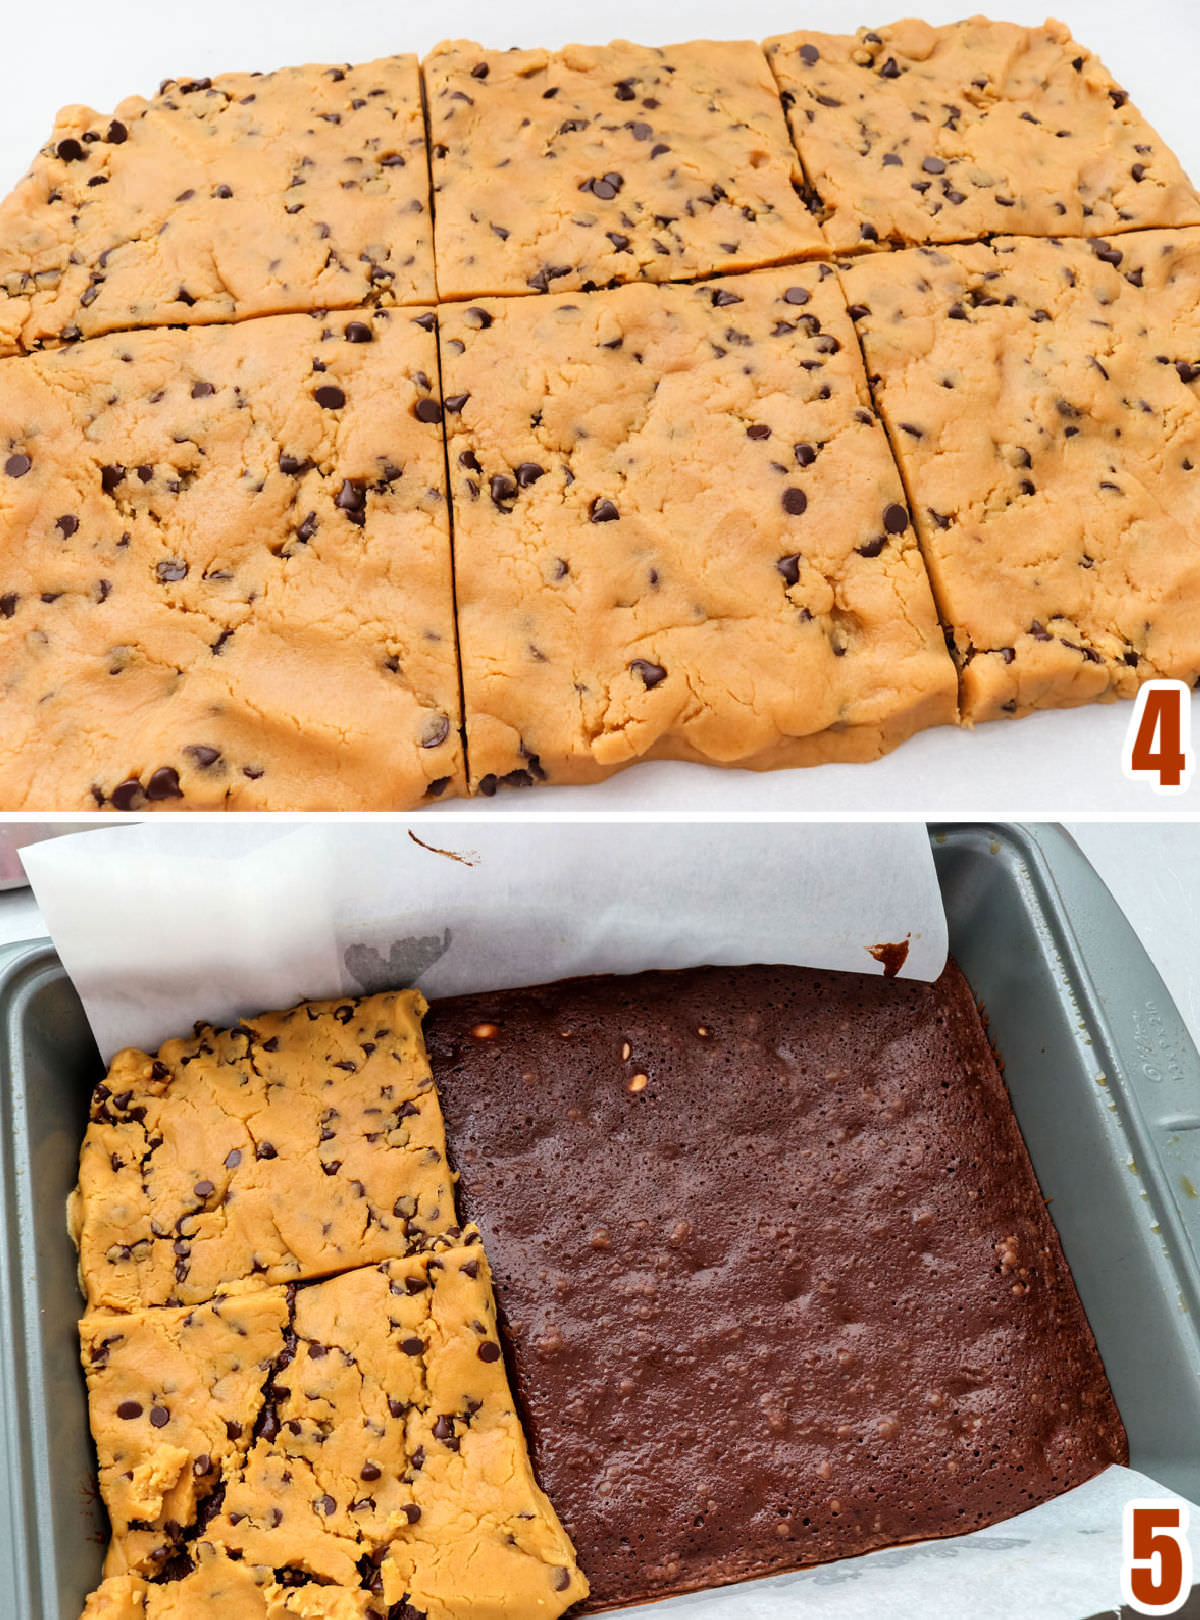 Collage image showing how to add the Peanut Butter Cookie dough to the partially cooked pan of brownies.